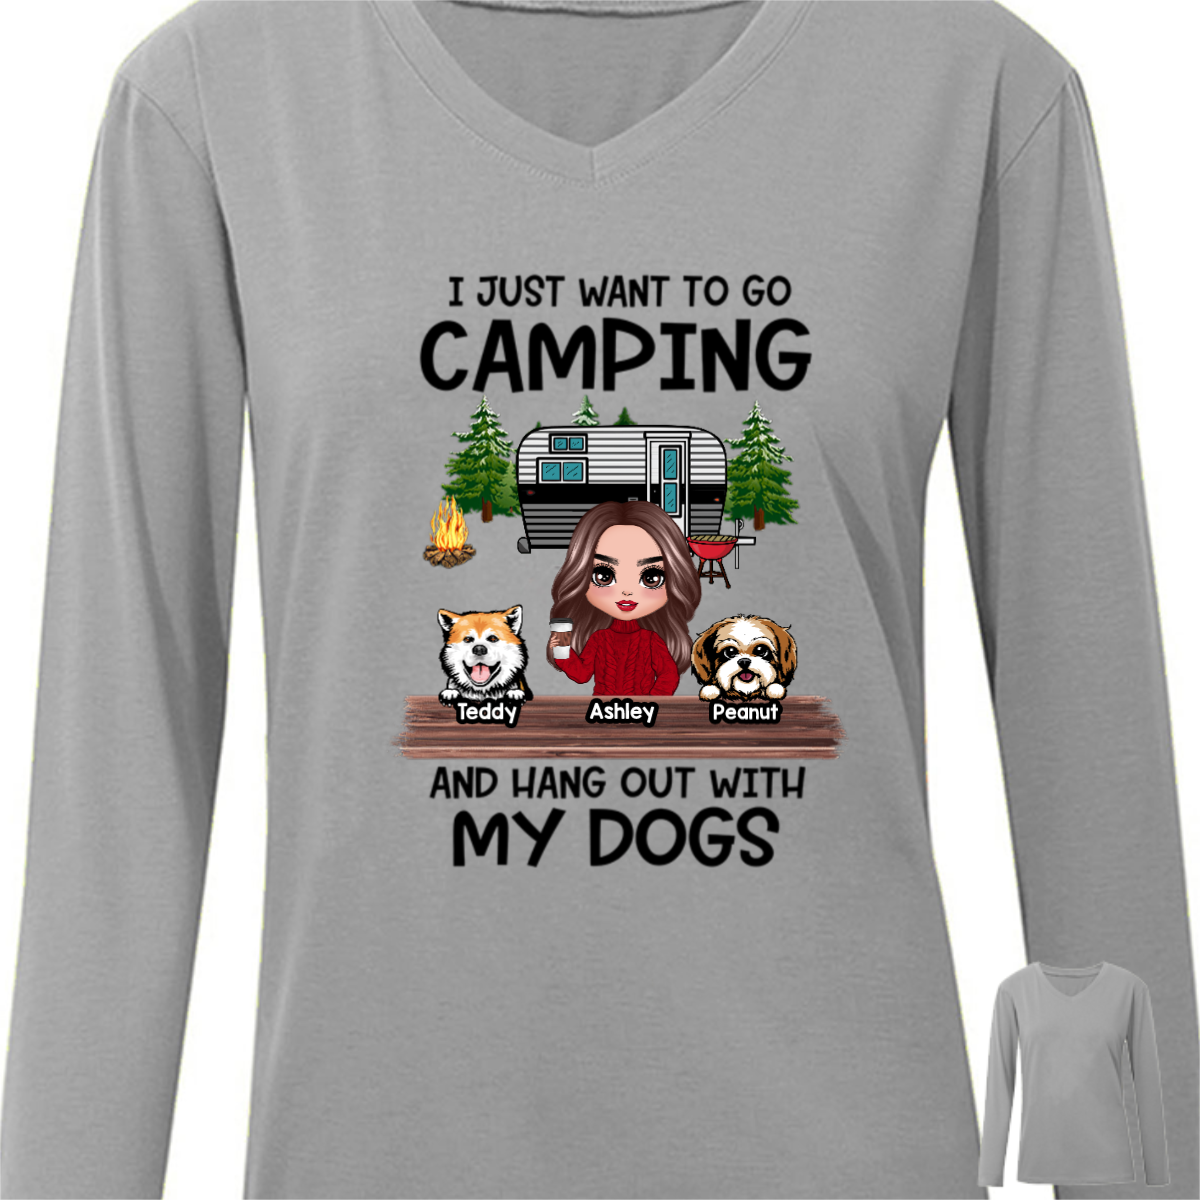 Go Camping And Hang Out With My Dogs ドールガール パーソナライズ 長袖シャツ